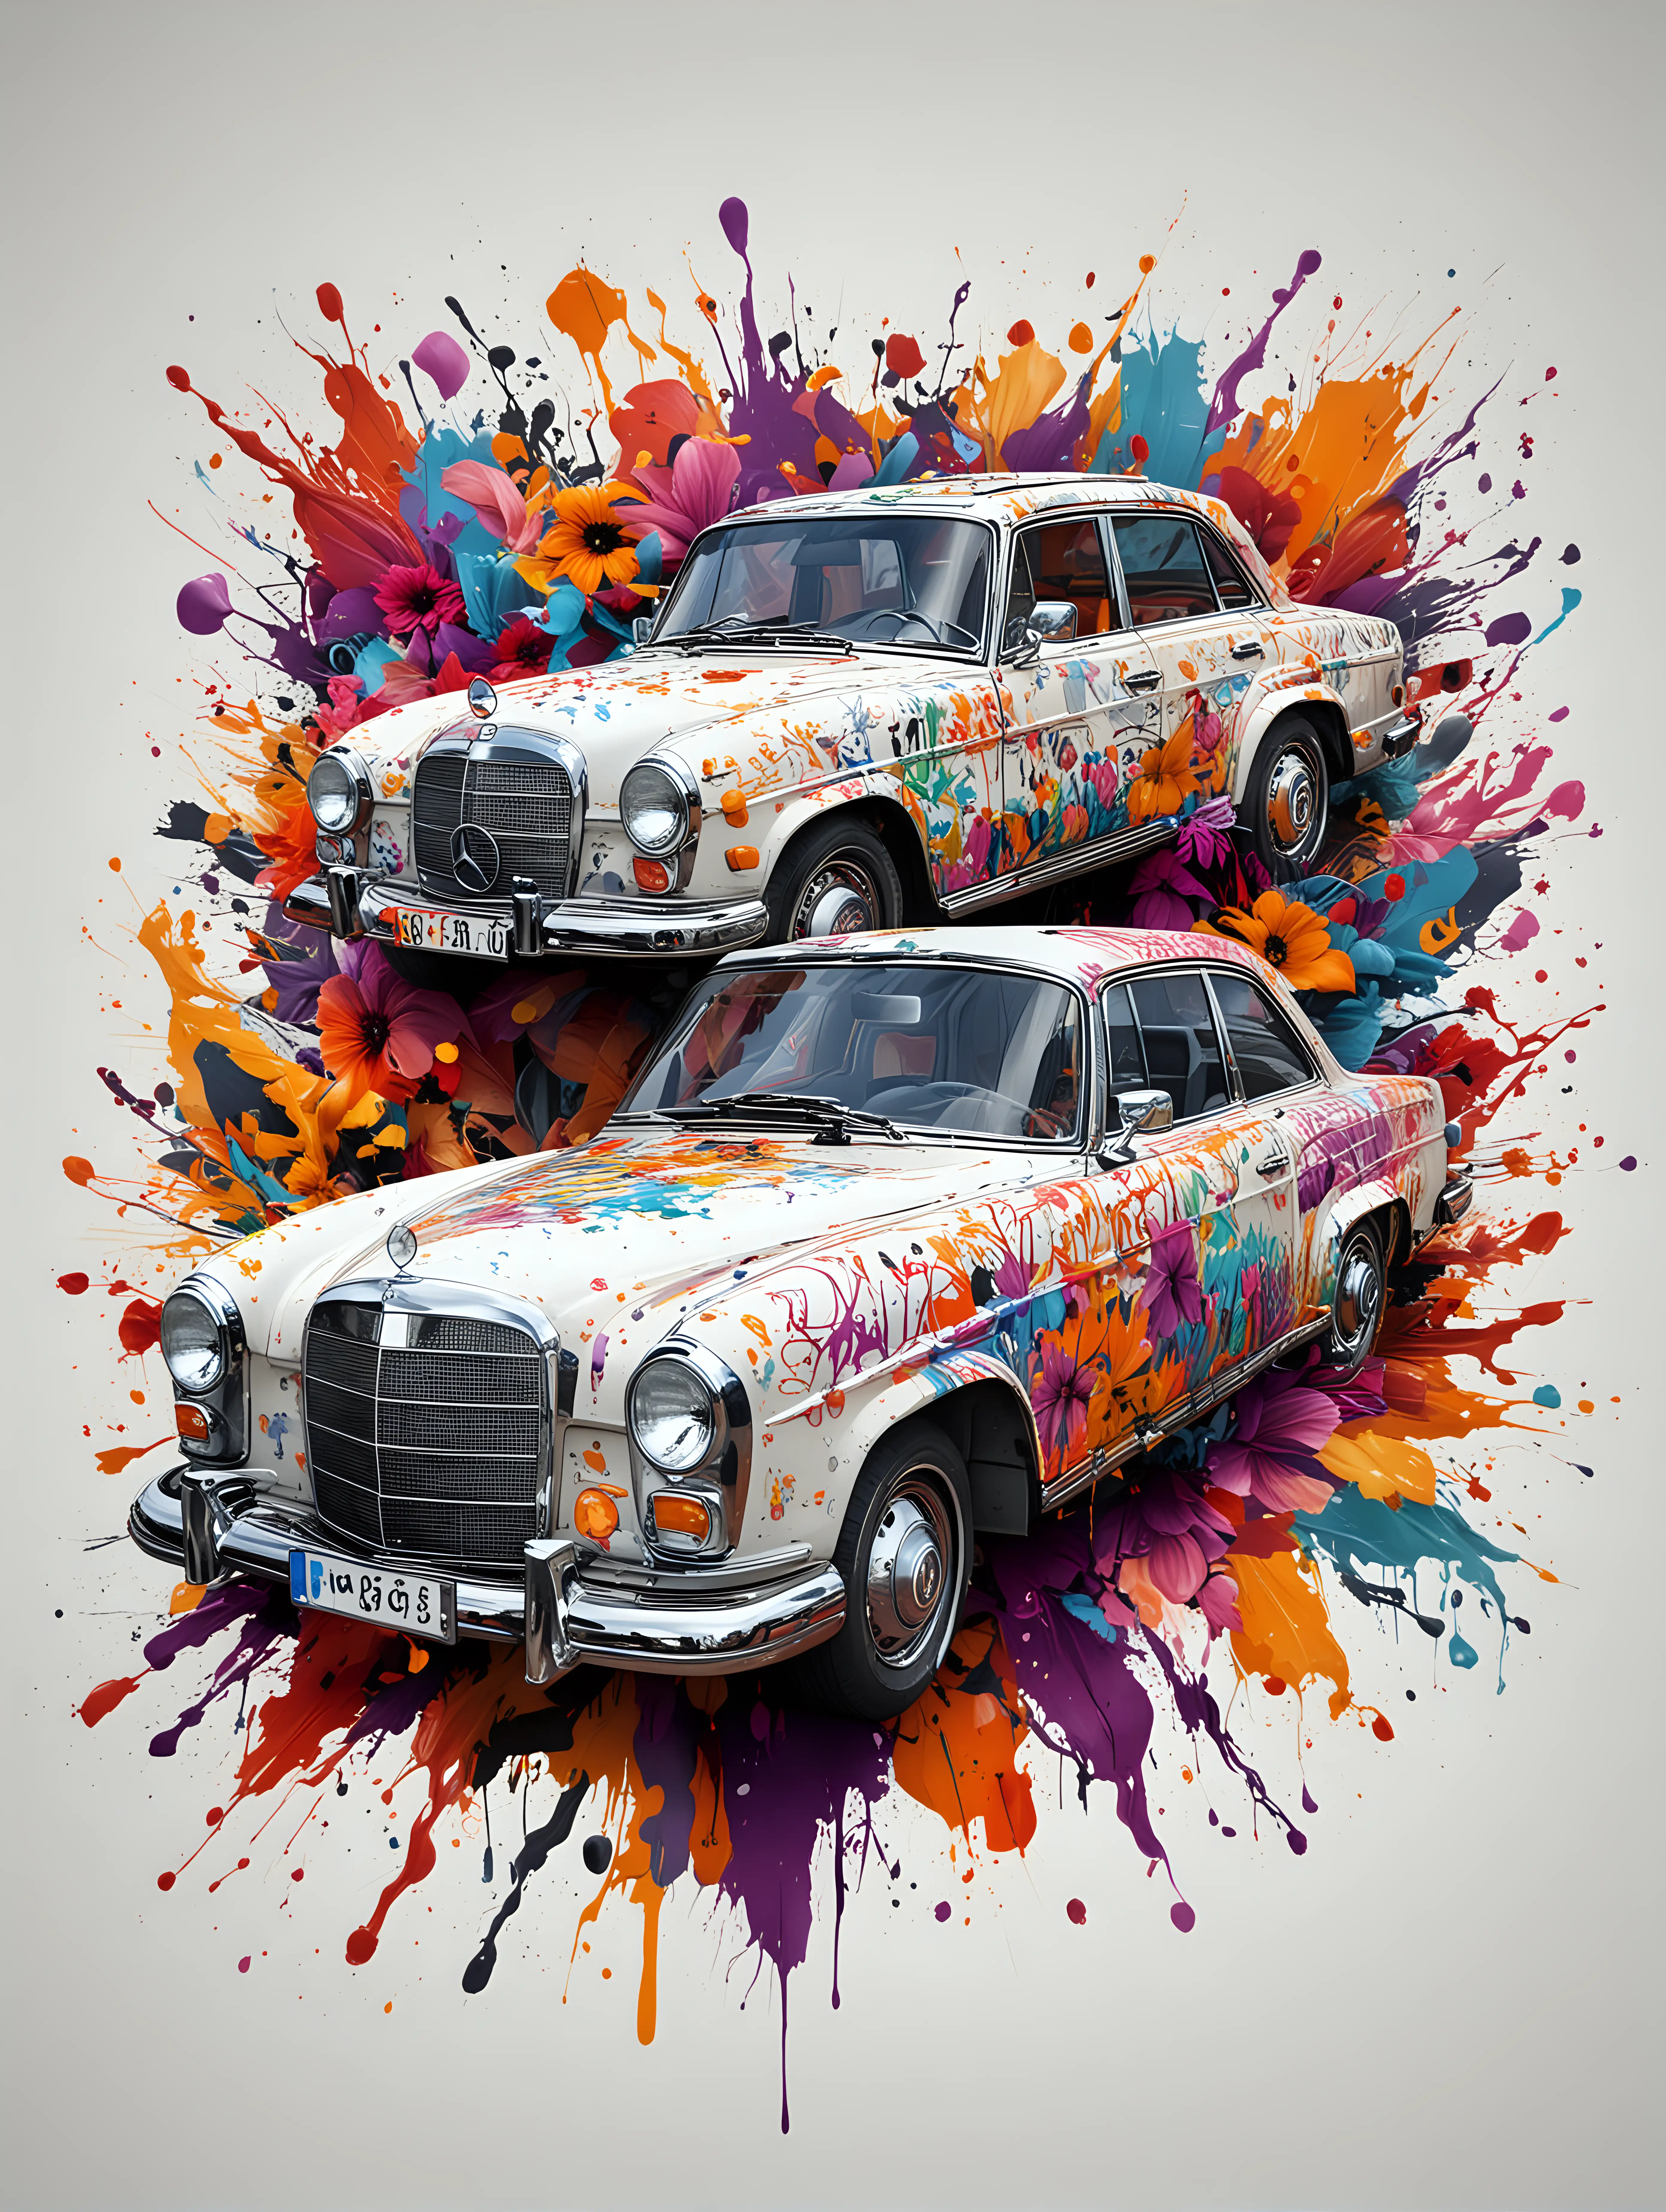 Colorful Abstract Painting with Hip Hop Halloween Floral Theme and 1955 MercedesBenz 300SC Luxury Car on Dead World Background Graffiti Cartoon Art Digital Download